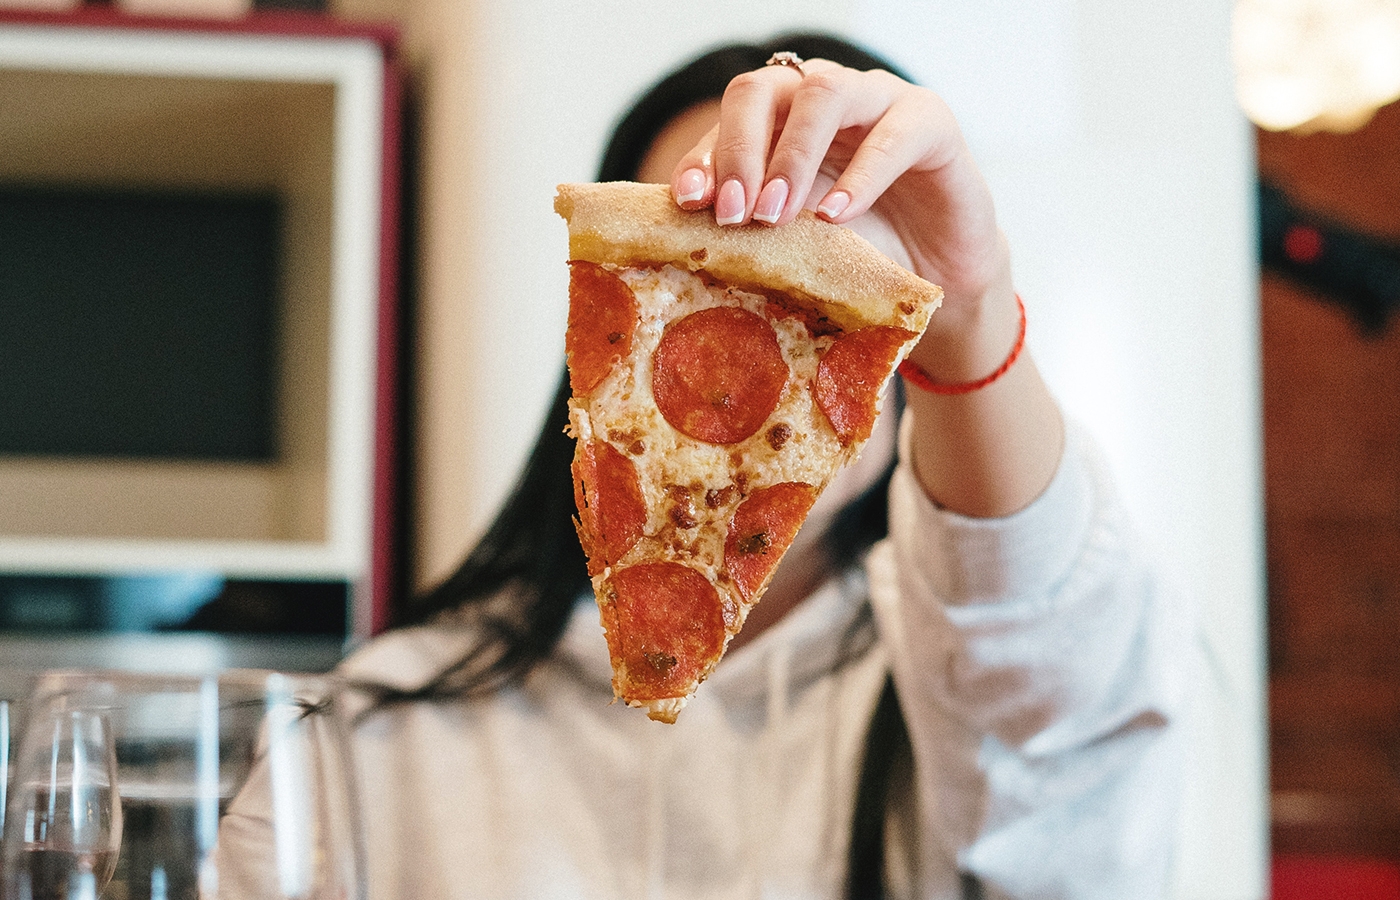 Say Hello to ‘The New York Pizza Project’